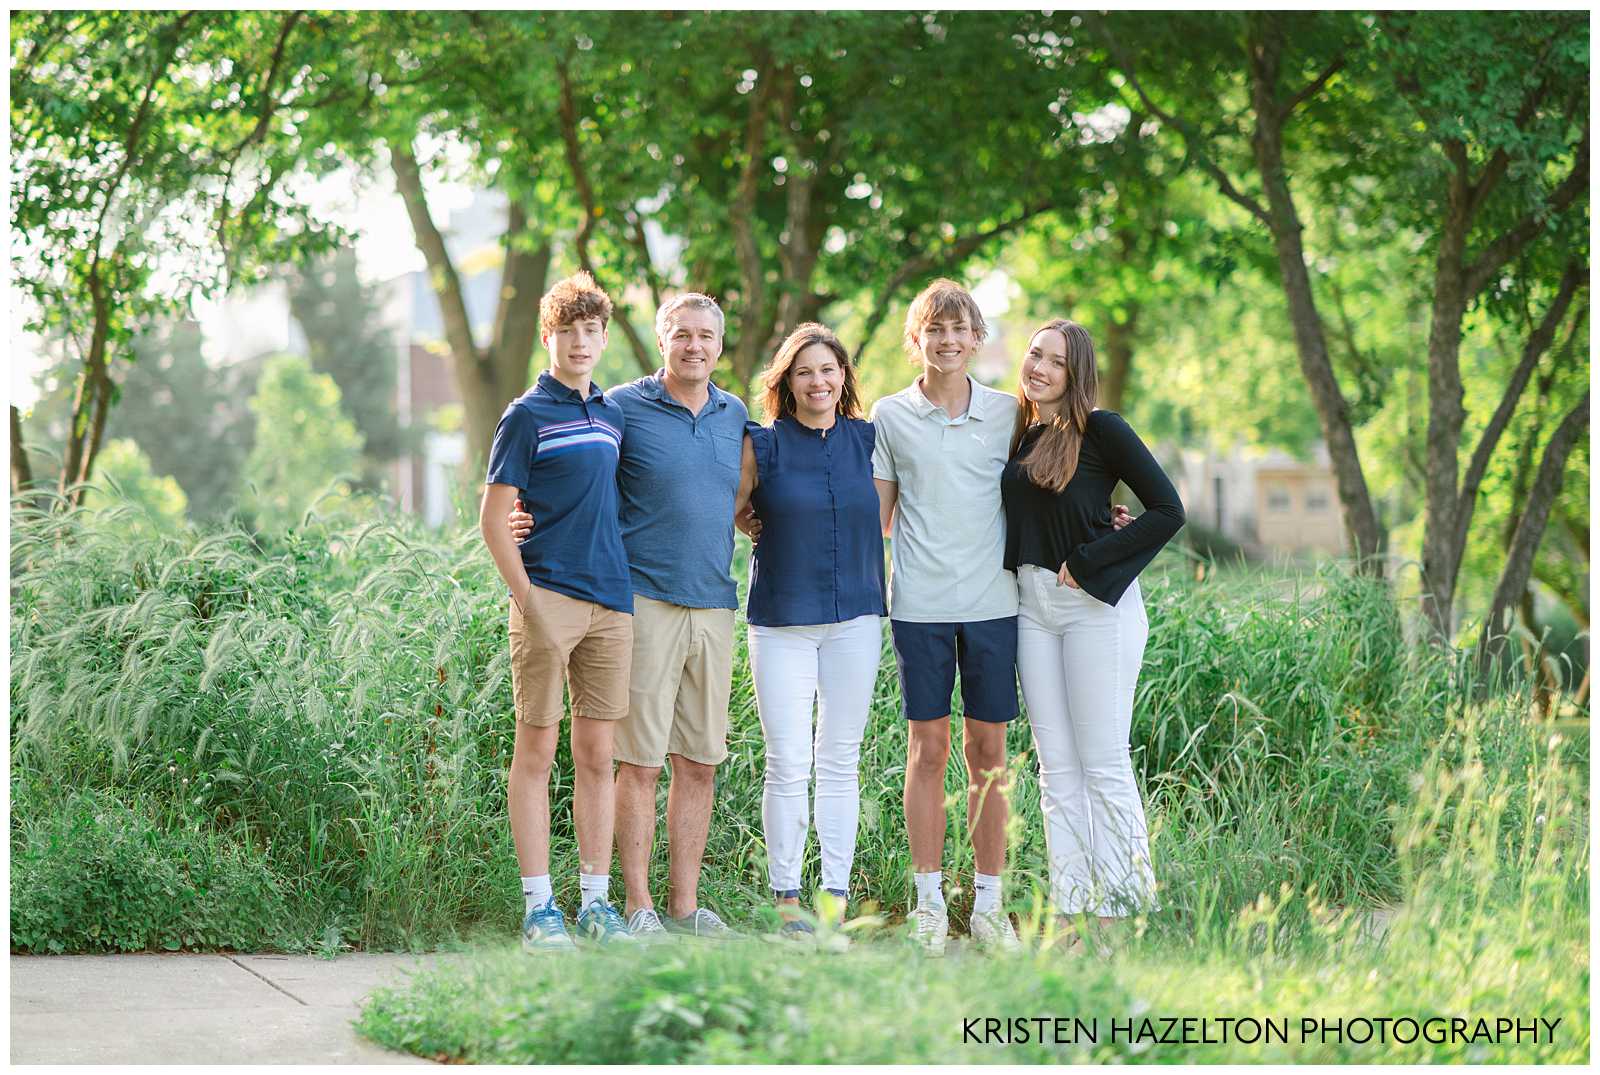 Family of five with three teenage children at photoshoot highlighting family photos with teens by Chicago photographer Kristen Hazelton.